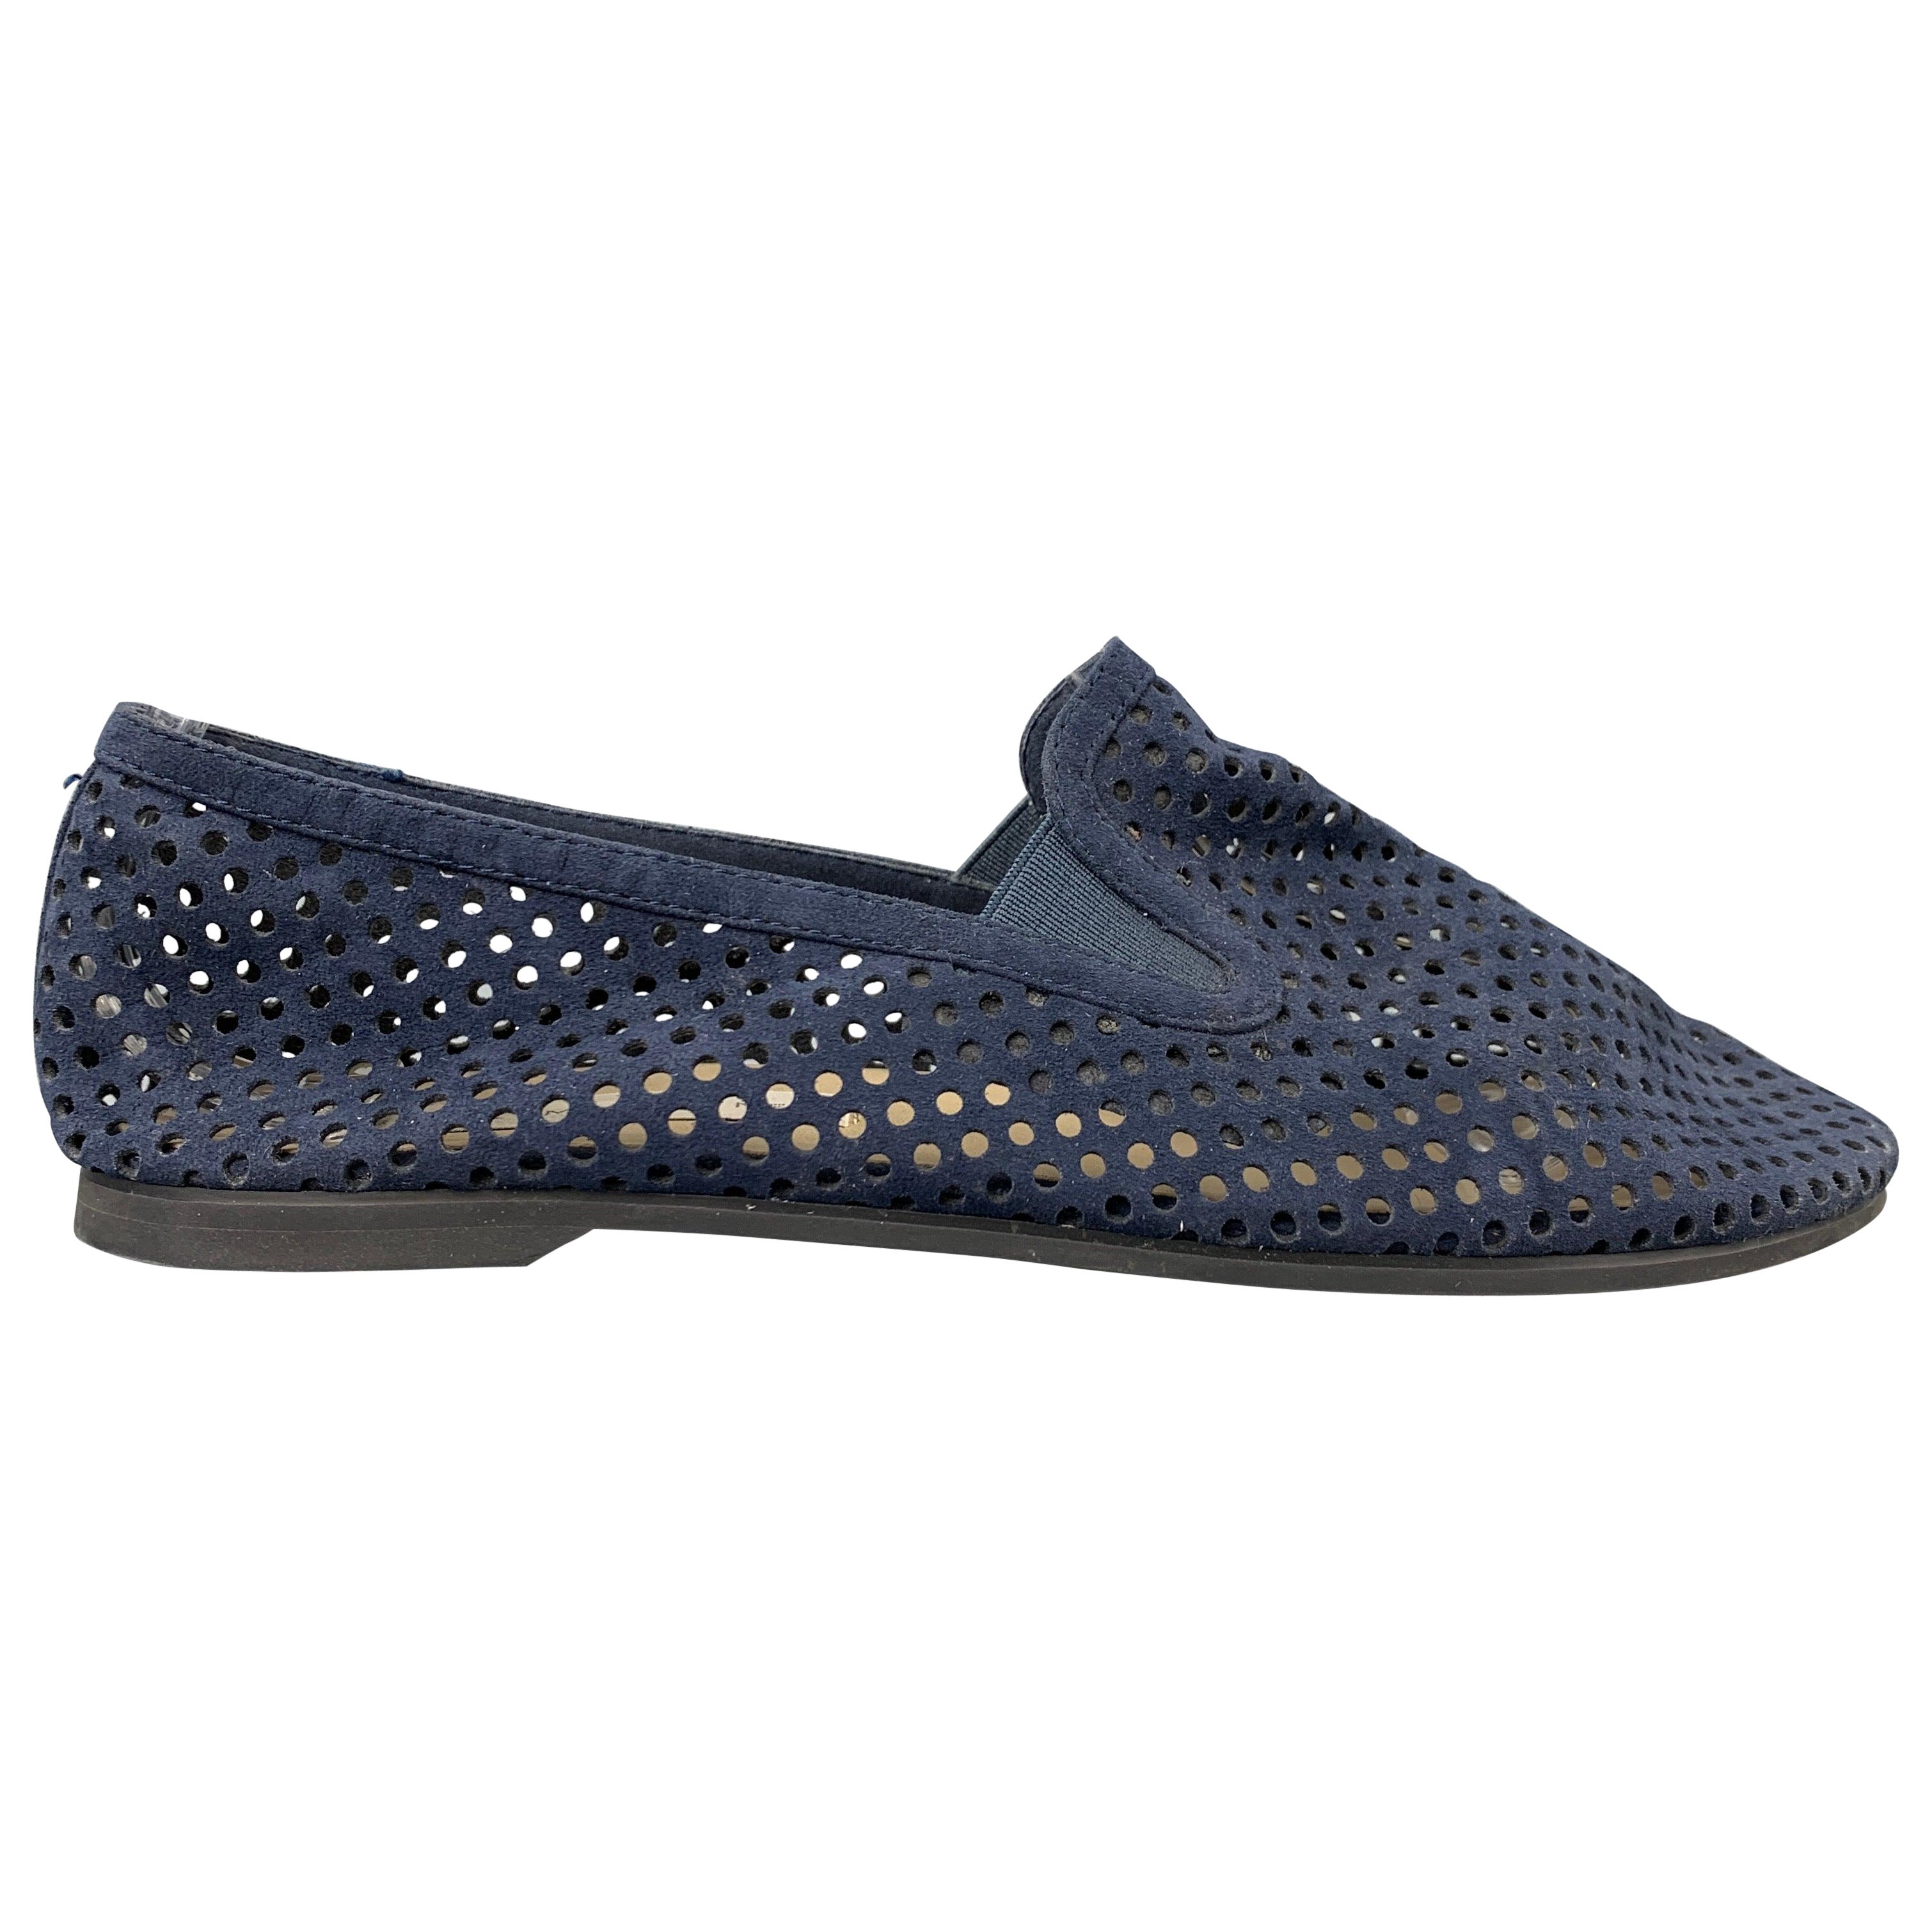 STELLA McCARTNEY Size 7.5 Navy Perforated Faux Suede Flats For Sale